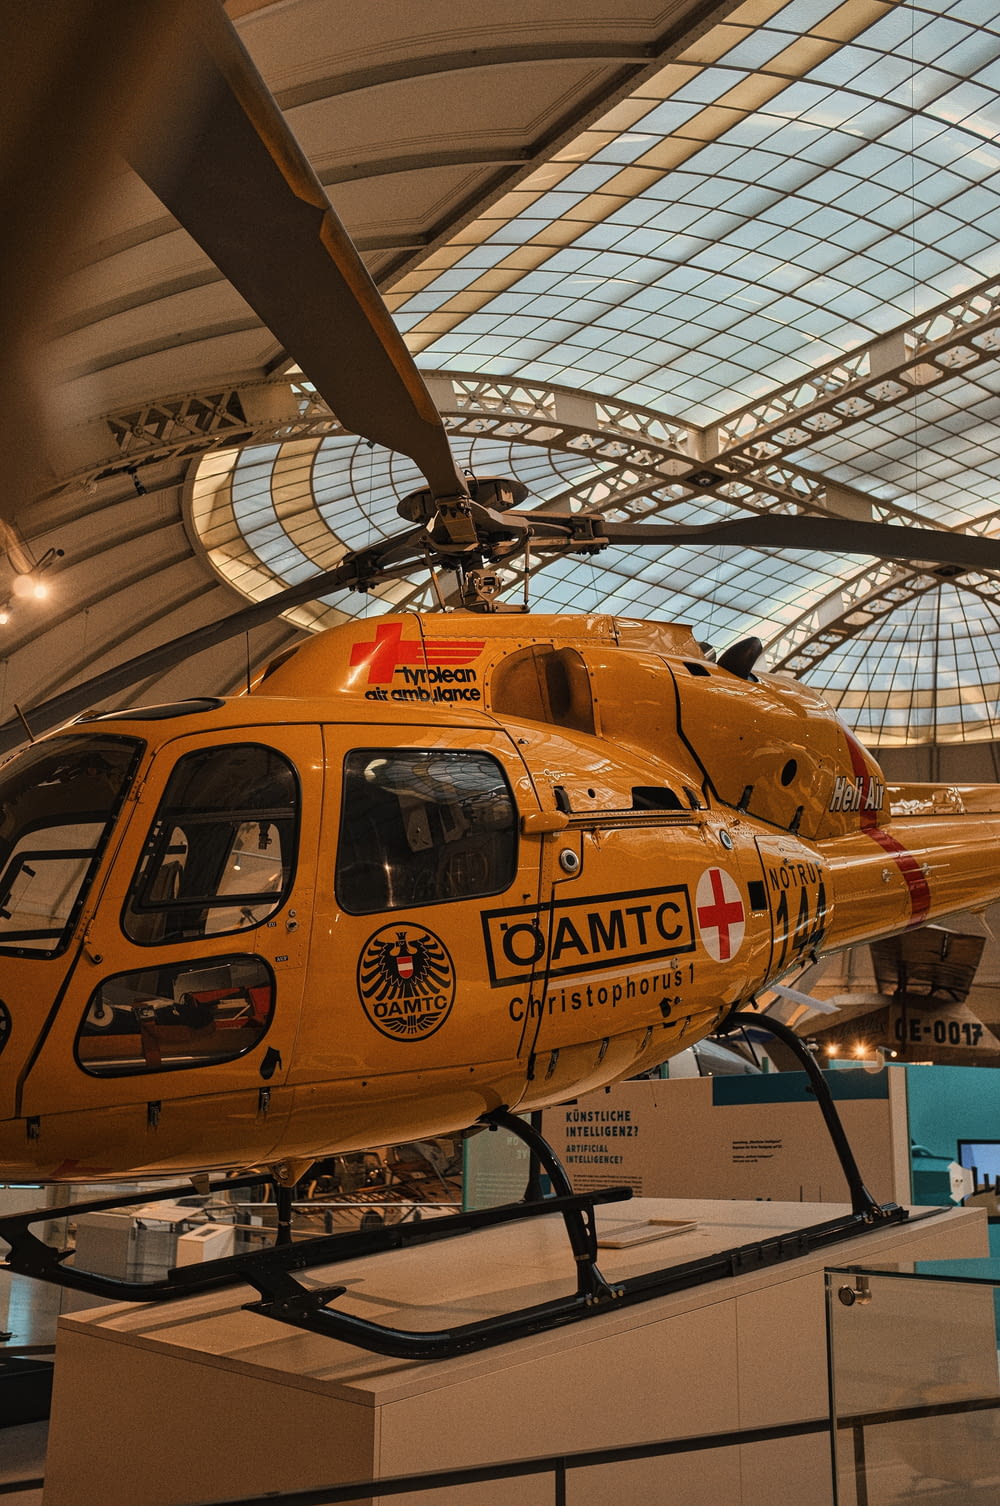 a yellow helicopter is on display in a museum